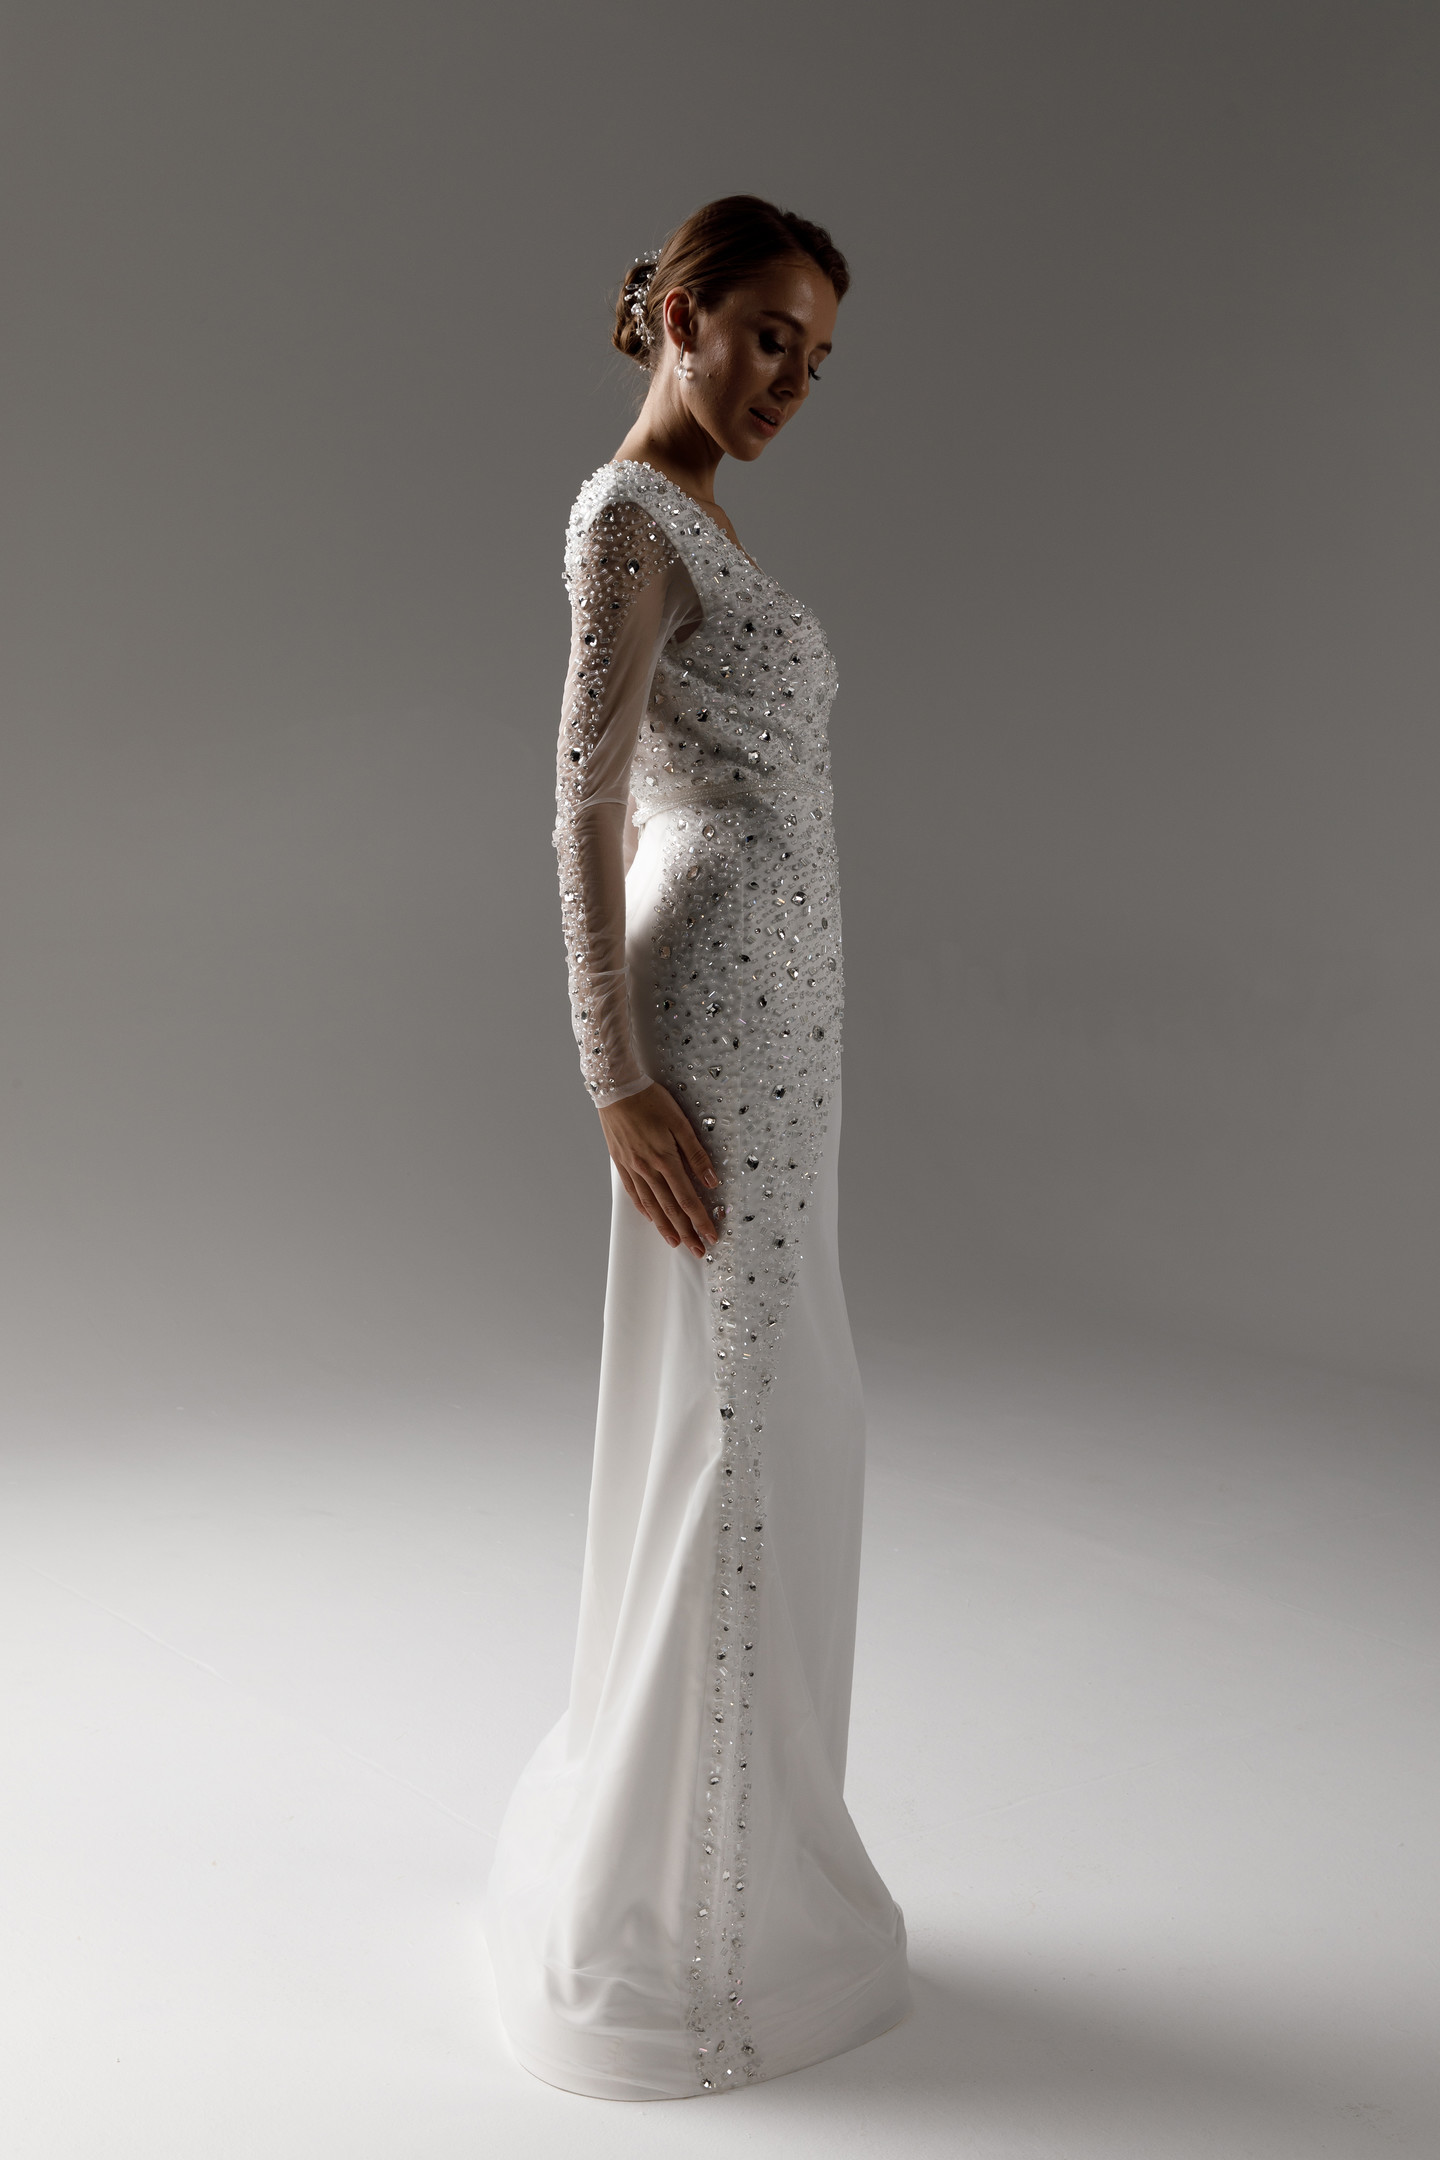 Raquel gown, 2021, couture, dress, bridal, off-white, embroidery, sheath silhouette, sleeves